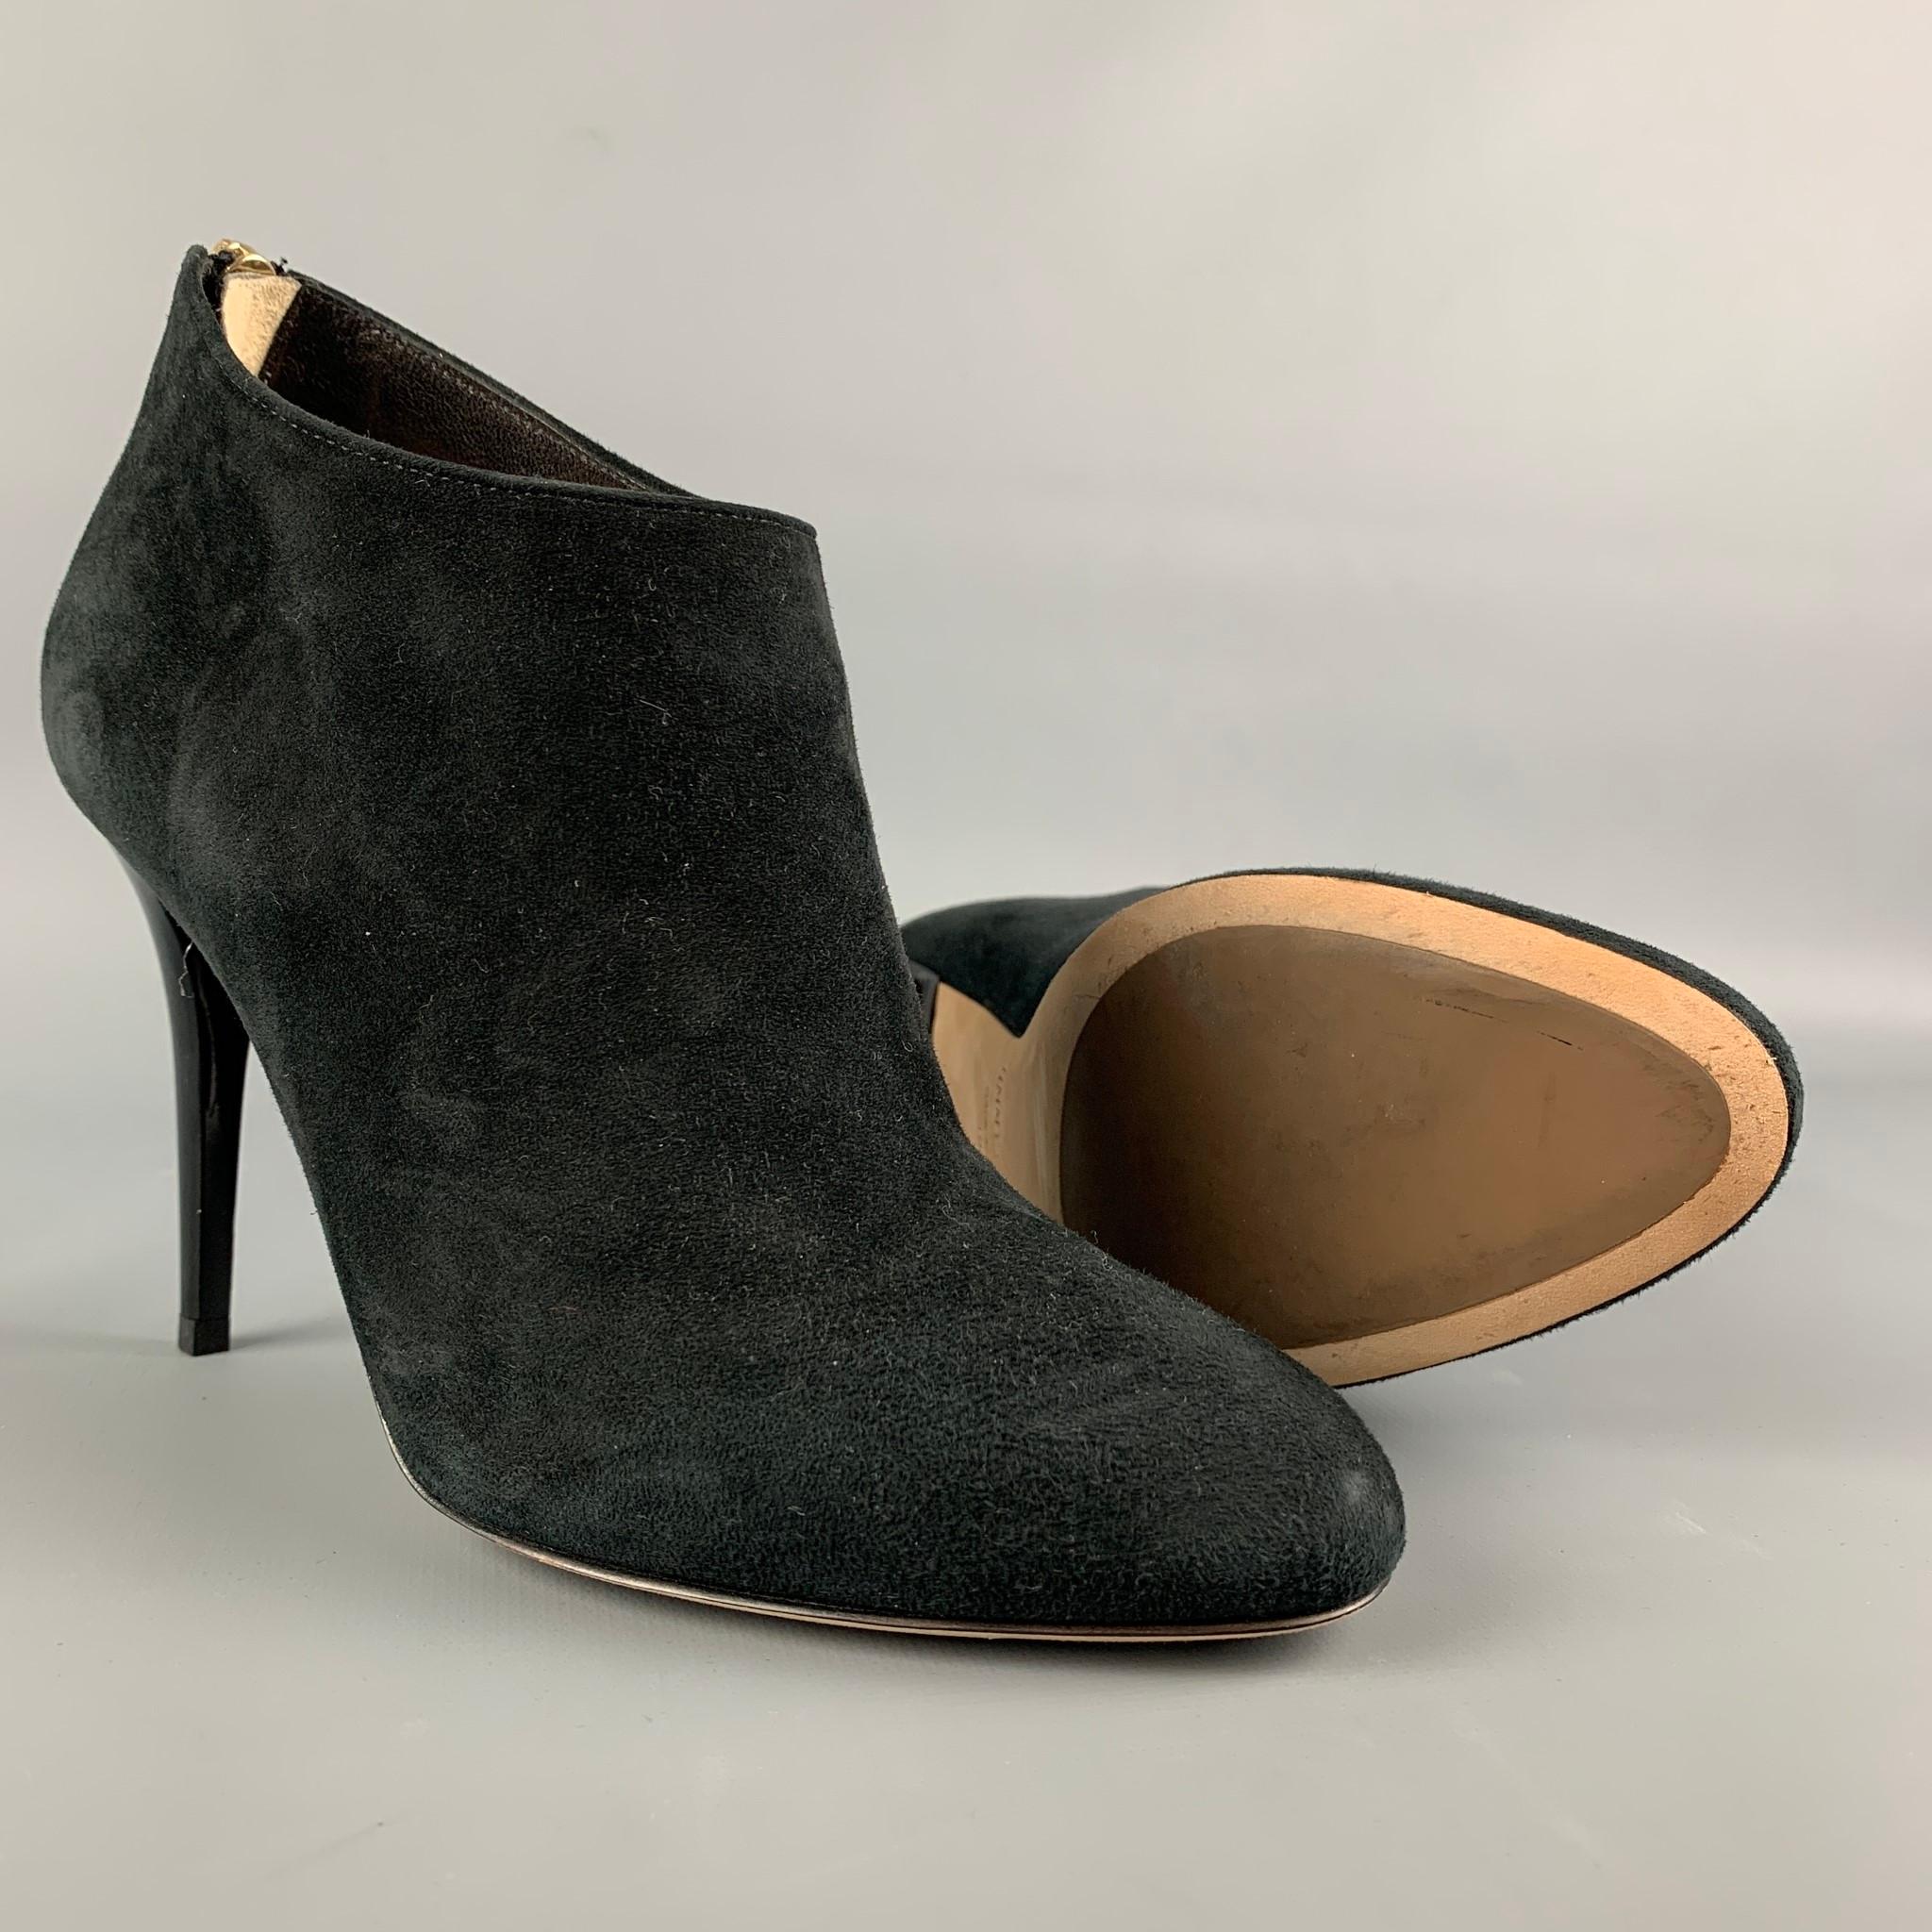 JIMMY CHOO ankle boots comes in a black suede featuring a back zipper closure, wooden sole, and a stiletto heel. Made in Italy.

Very Good Pre-Owned Condition.
Marked: 38

Measurements:

Heel: 4 in. 